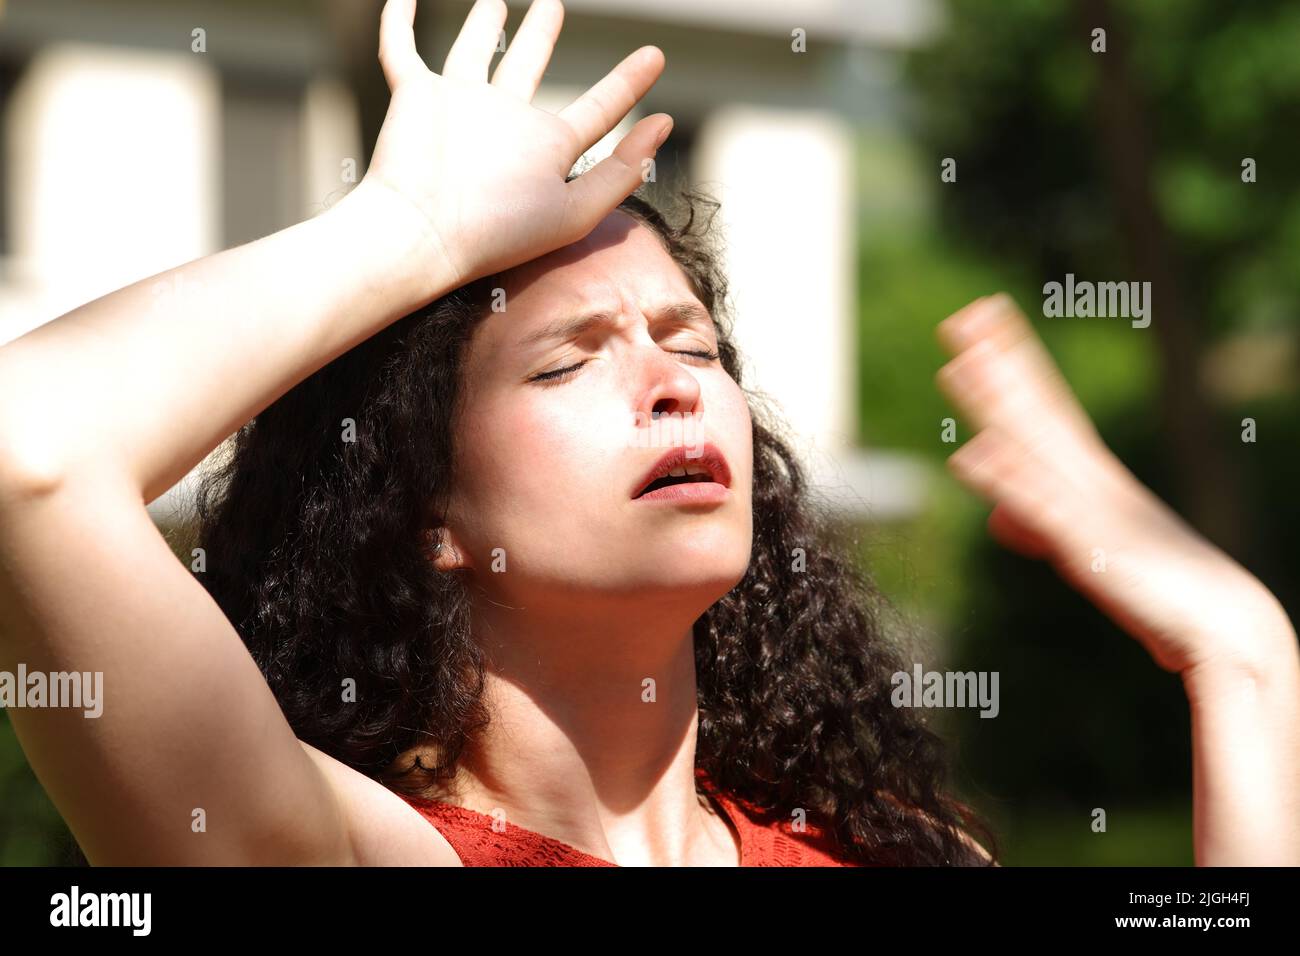 Overwhelmed woman suffering heat stroke a sunny day in a park Stock Photo